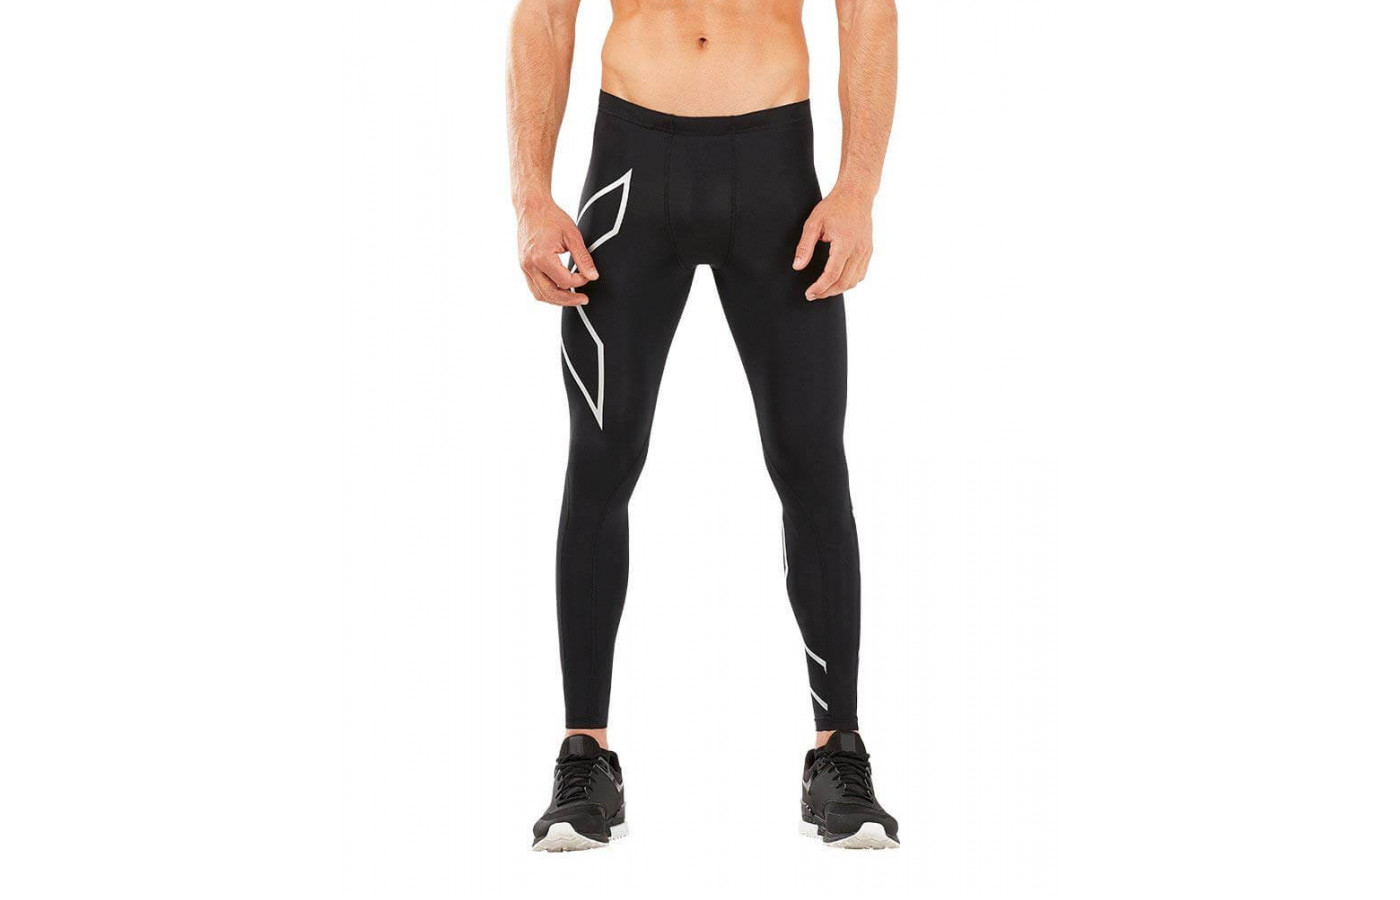 2XU Compression Tights can wick away moisture and improve blood flow.